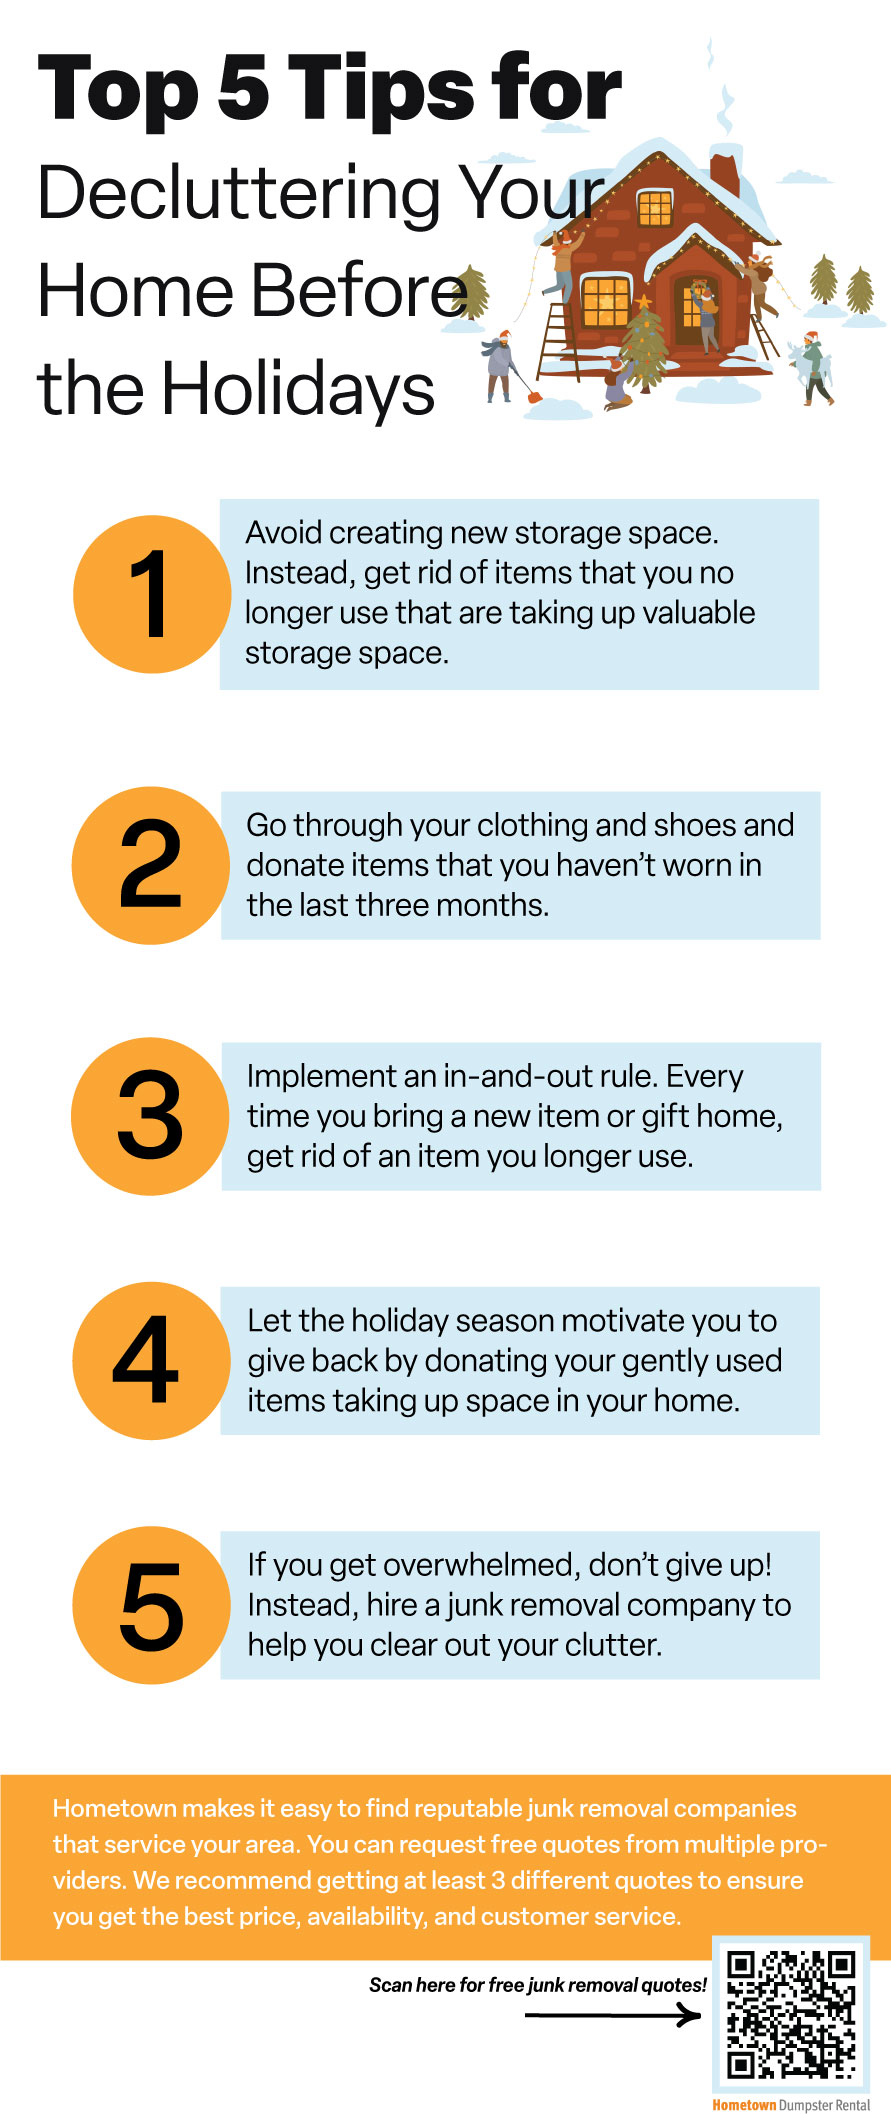 5 Tips for Decluttering Your Home Before the Holidays Infographic